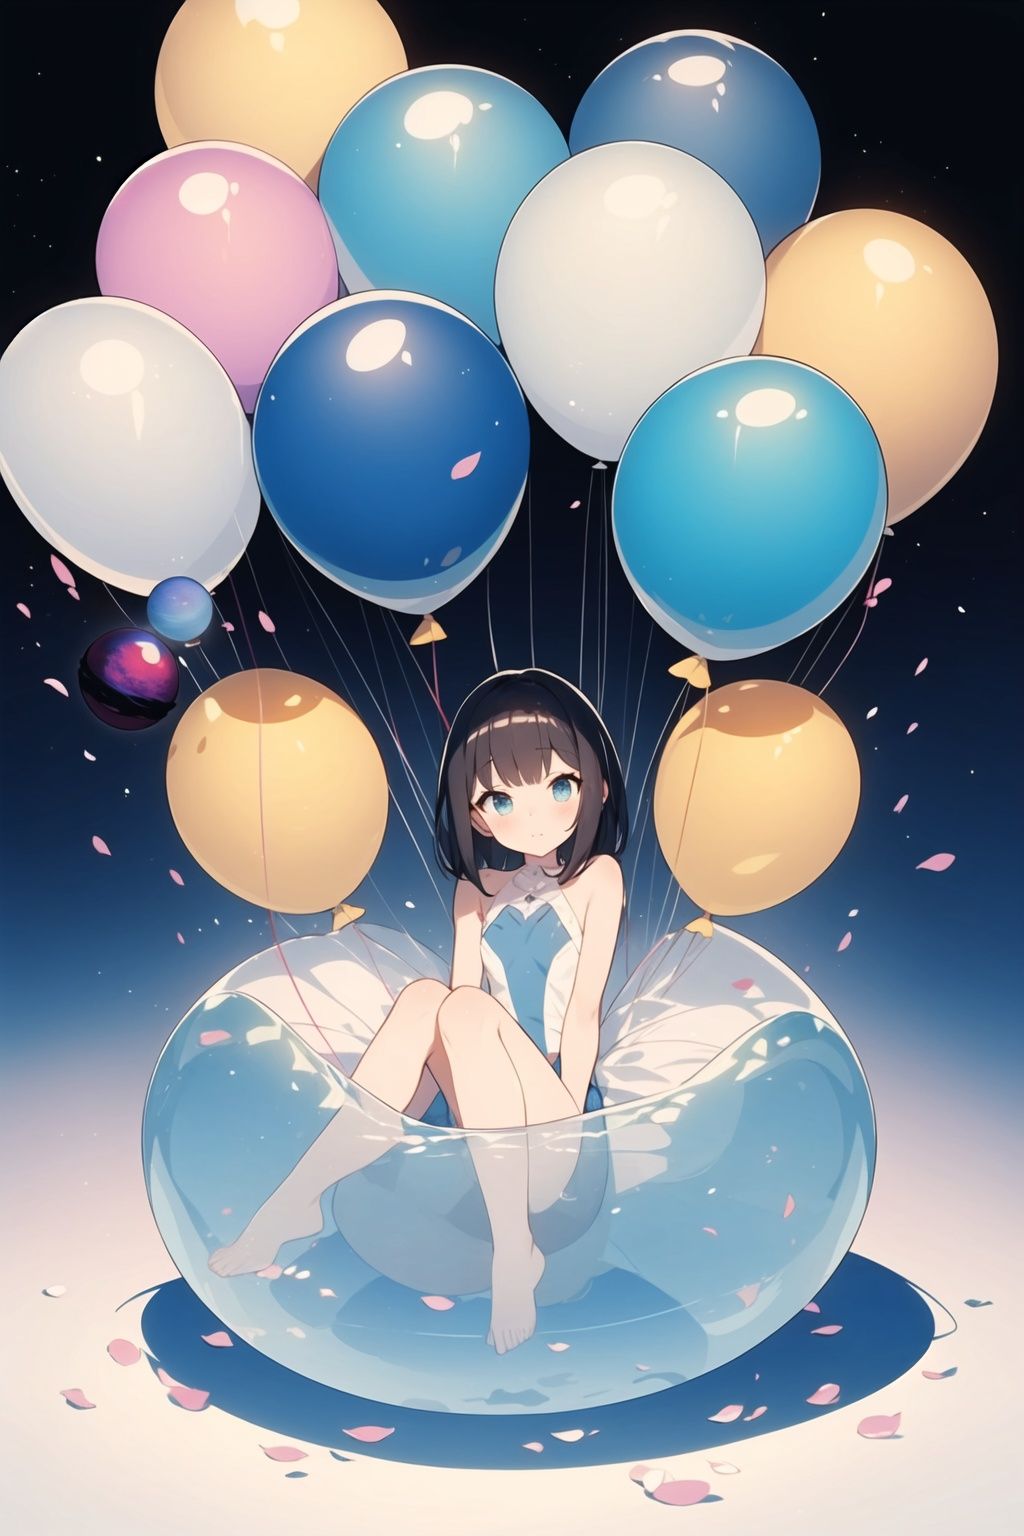 ([balloons:Small planets:0.5]:1.4), (Small_planets inside of balloons:1.4), (lots of colorful Small_planets:1.35)(colorful planets, earth, floating petals, big balloons:1.22),1 girl, cute face,Full body, sitting, detailed beautiful eyes, bare legs, costume combination, Goddess, perfect body, [nsfw:0.88](sitting on ice_planet:1.22)(lots of [floting blue Butterflies:floting ice:0.4]:1.22)(detailed light), (an extremely delicate and beautiful), volume light, best shadow,cinematic lighting, Depth of field, dynamic angle, Oily skin,